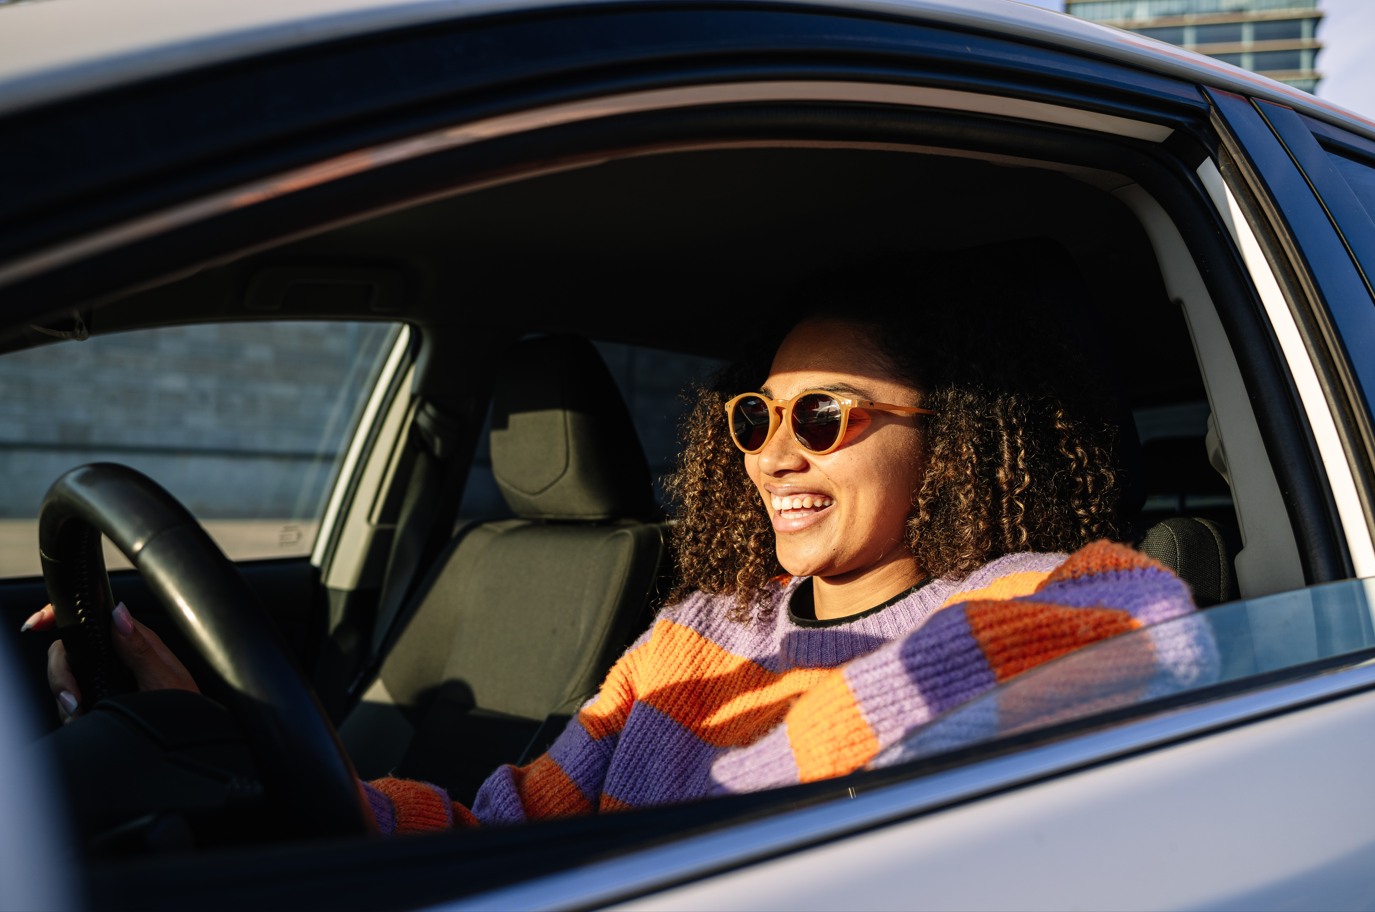 Young woman smiling with sunglasses driving in the car.